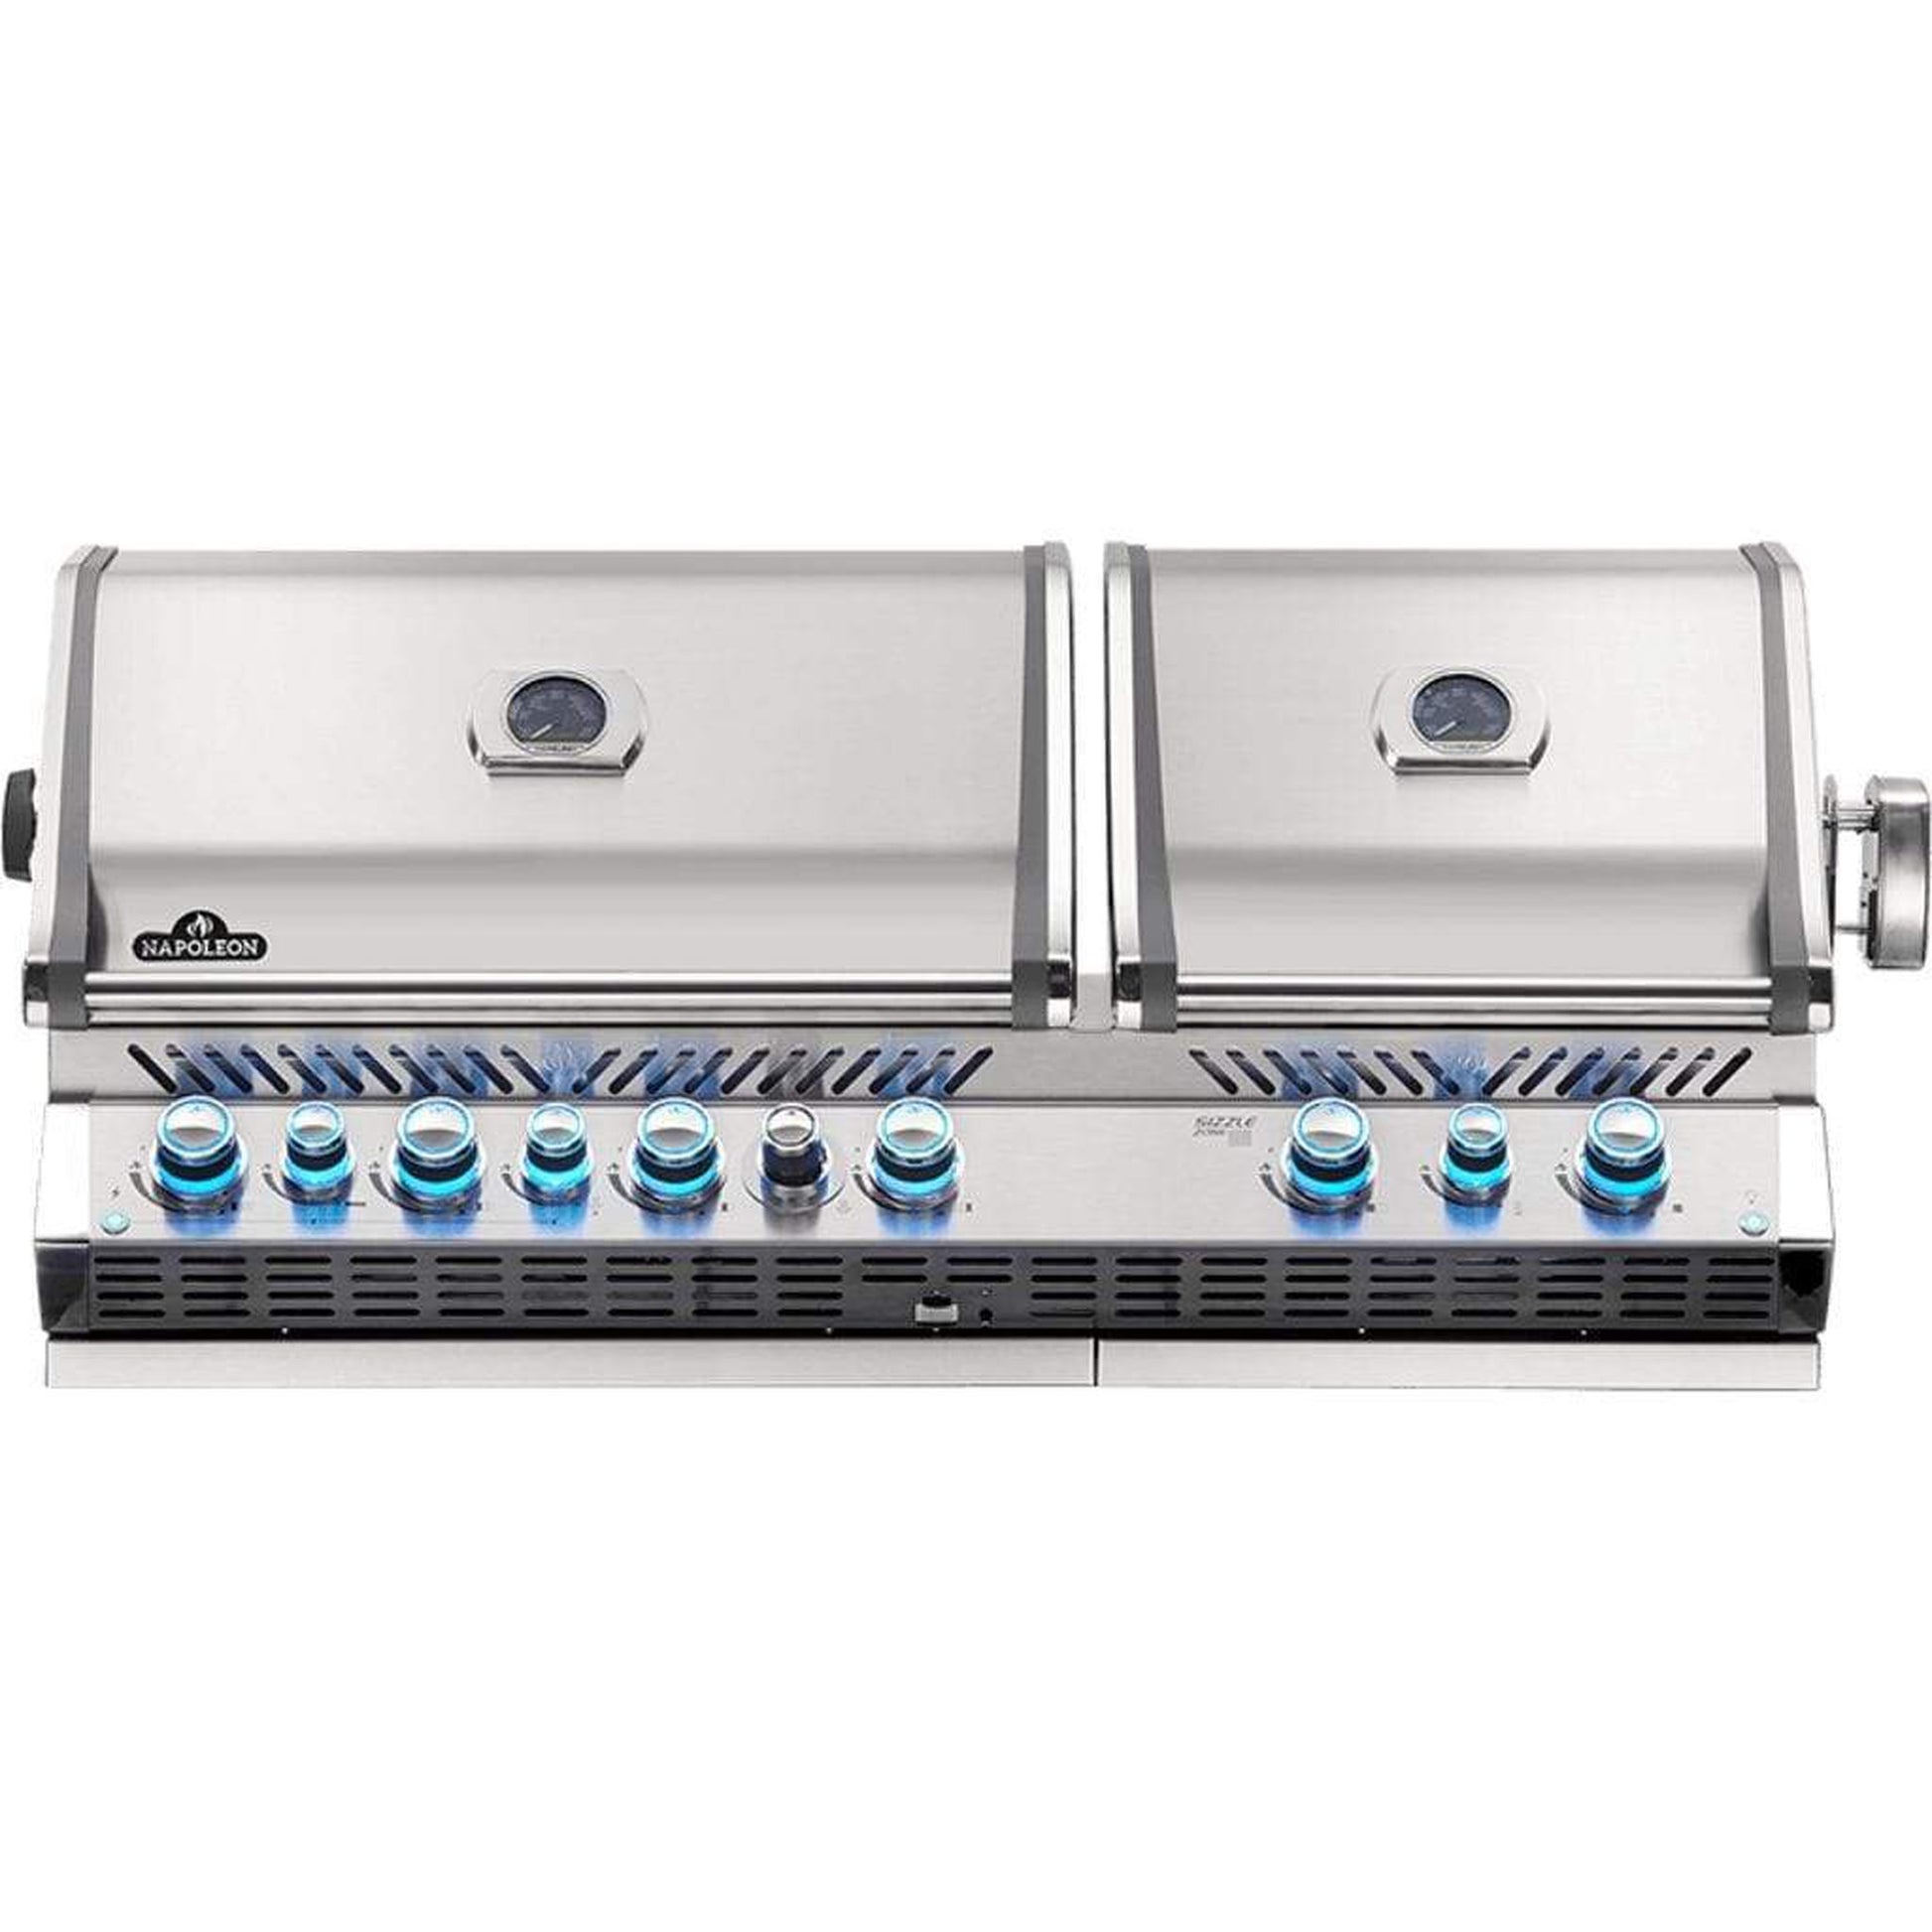 Napoleon 56" Prestige PRO 825 Built-in Gas Grill with Infrared Rear Burner and Infrared Sear Burners